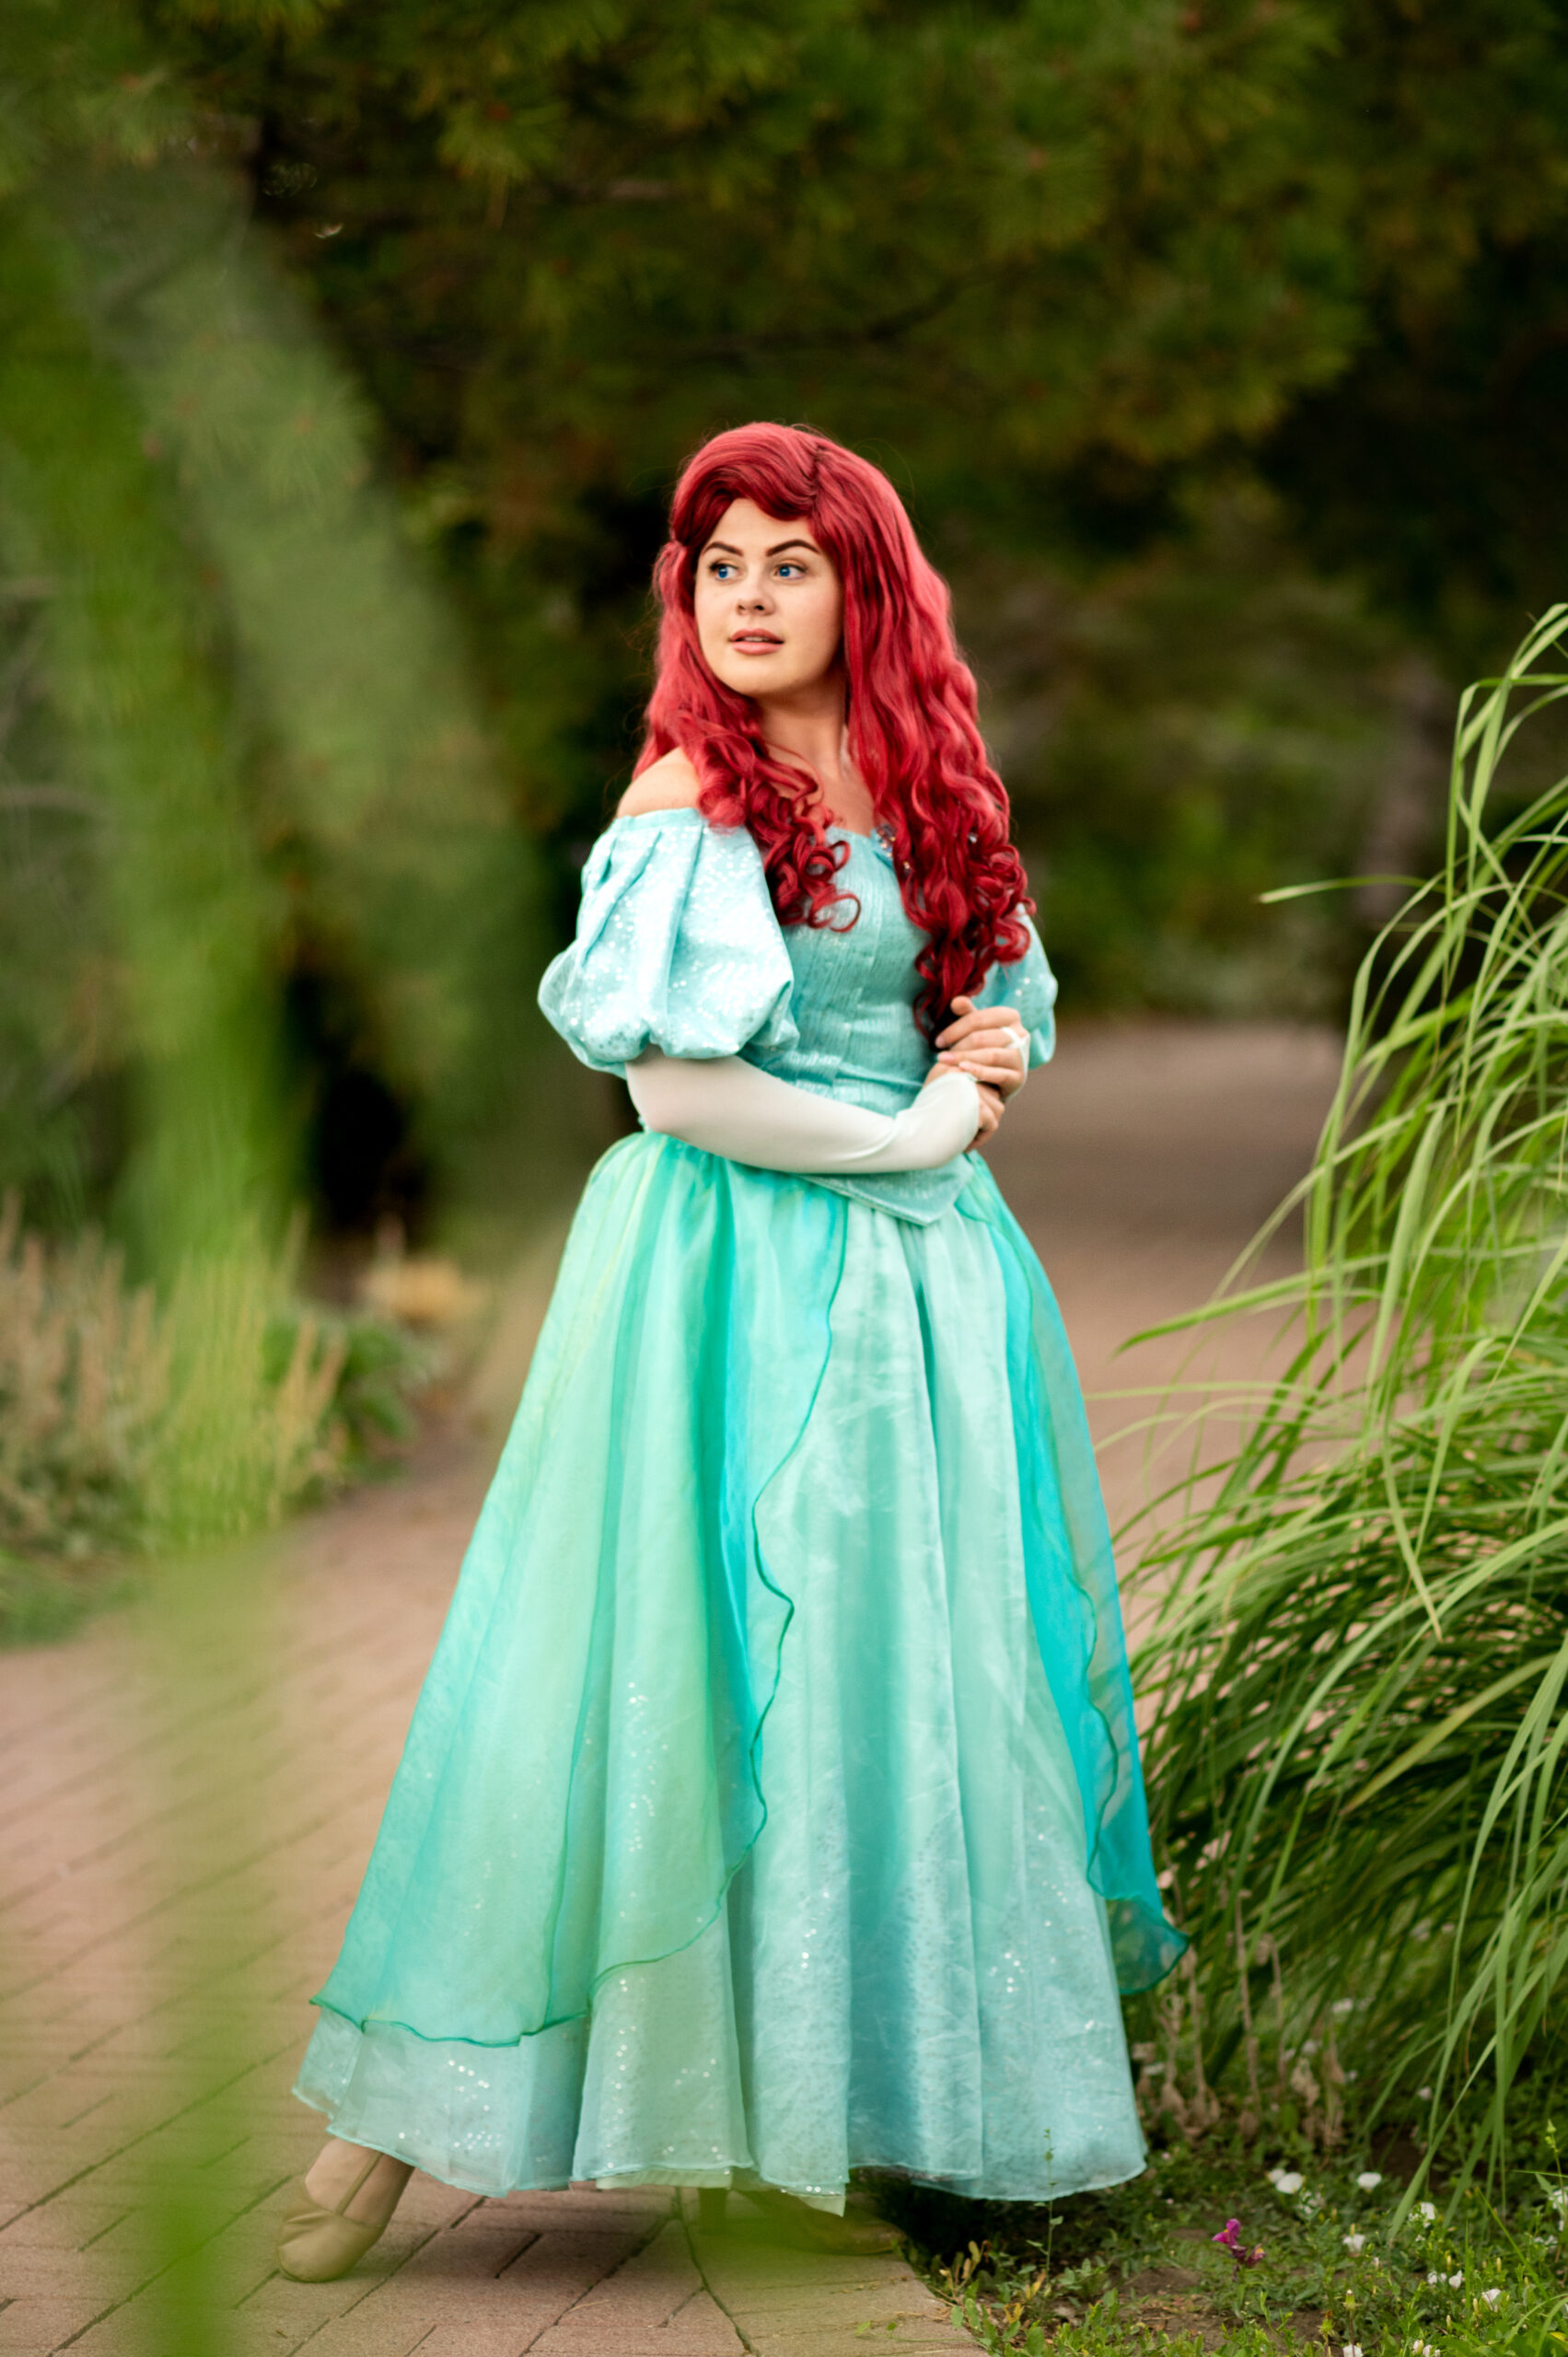 The Little Mermaid - Character Booking